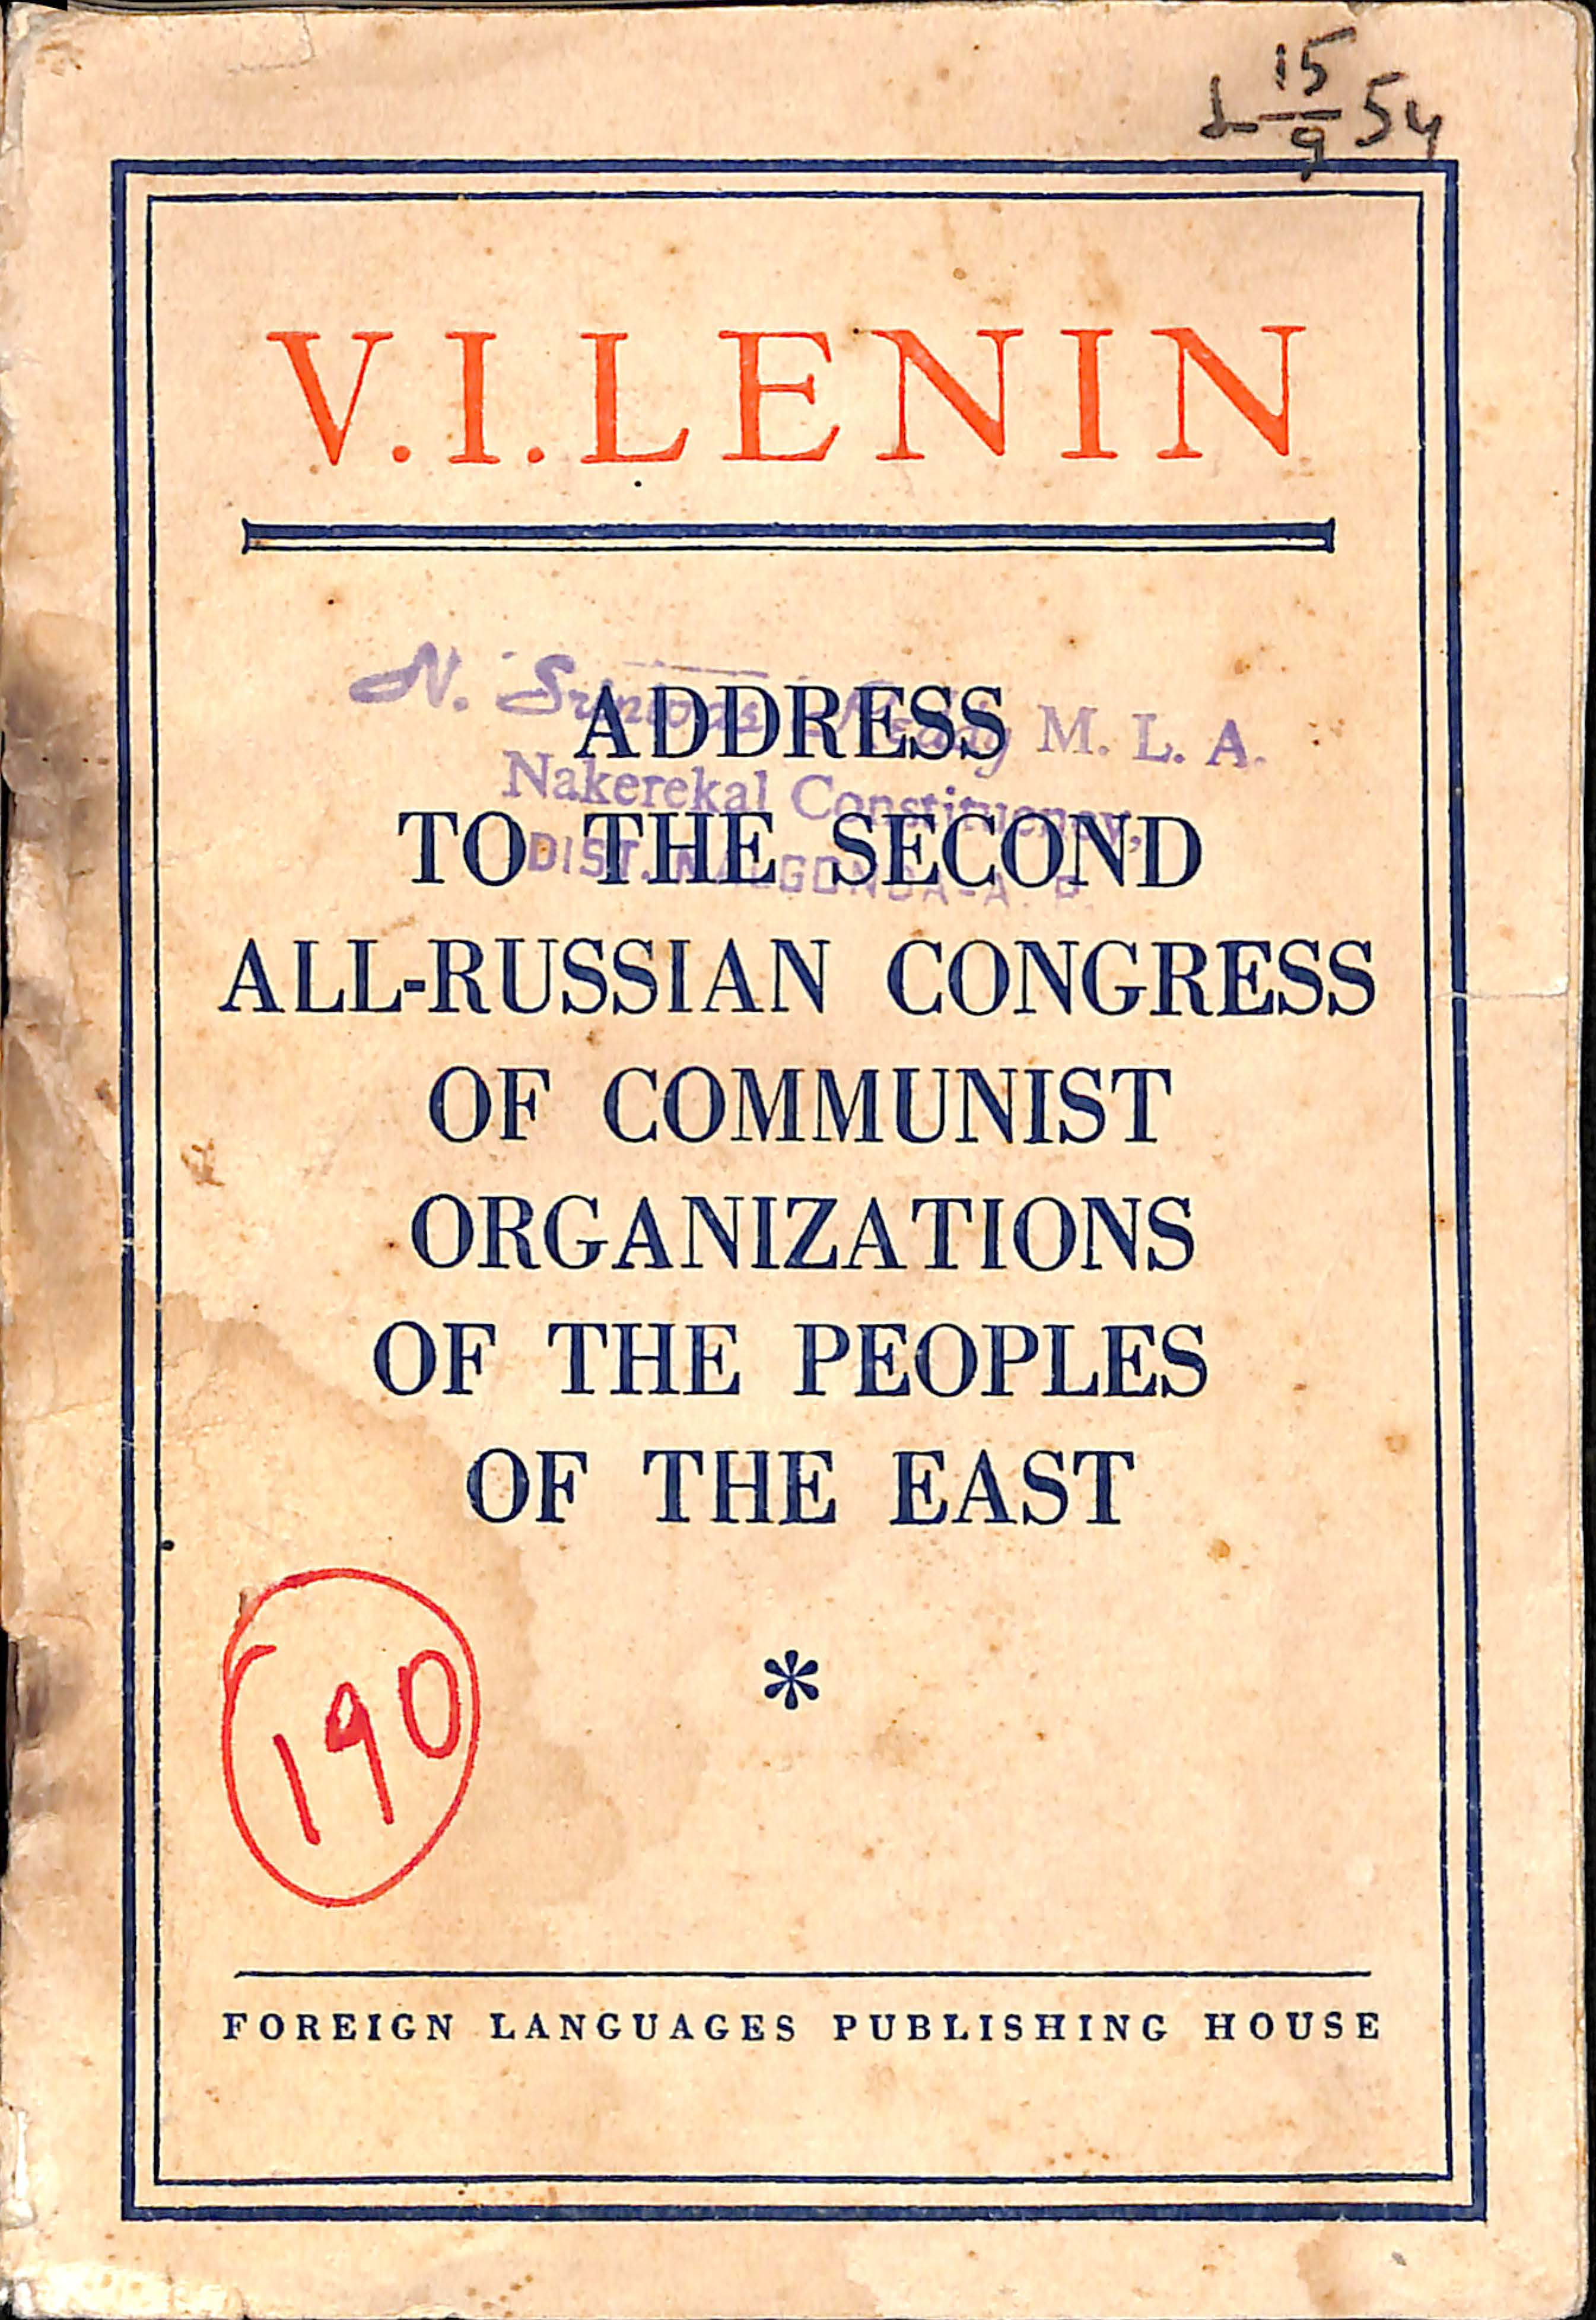 V.I.LENIN addres to the second all-russian congress of communist organizations of the east"